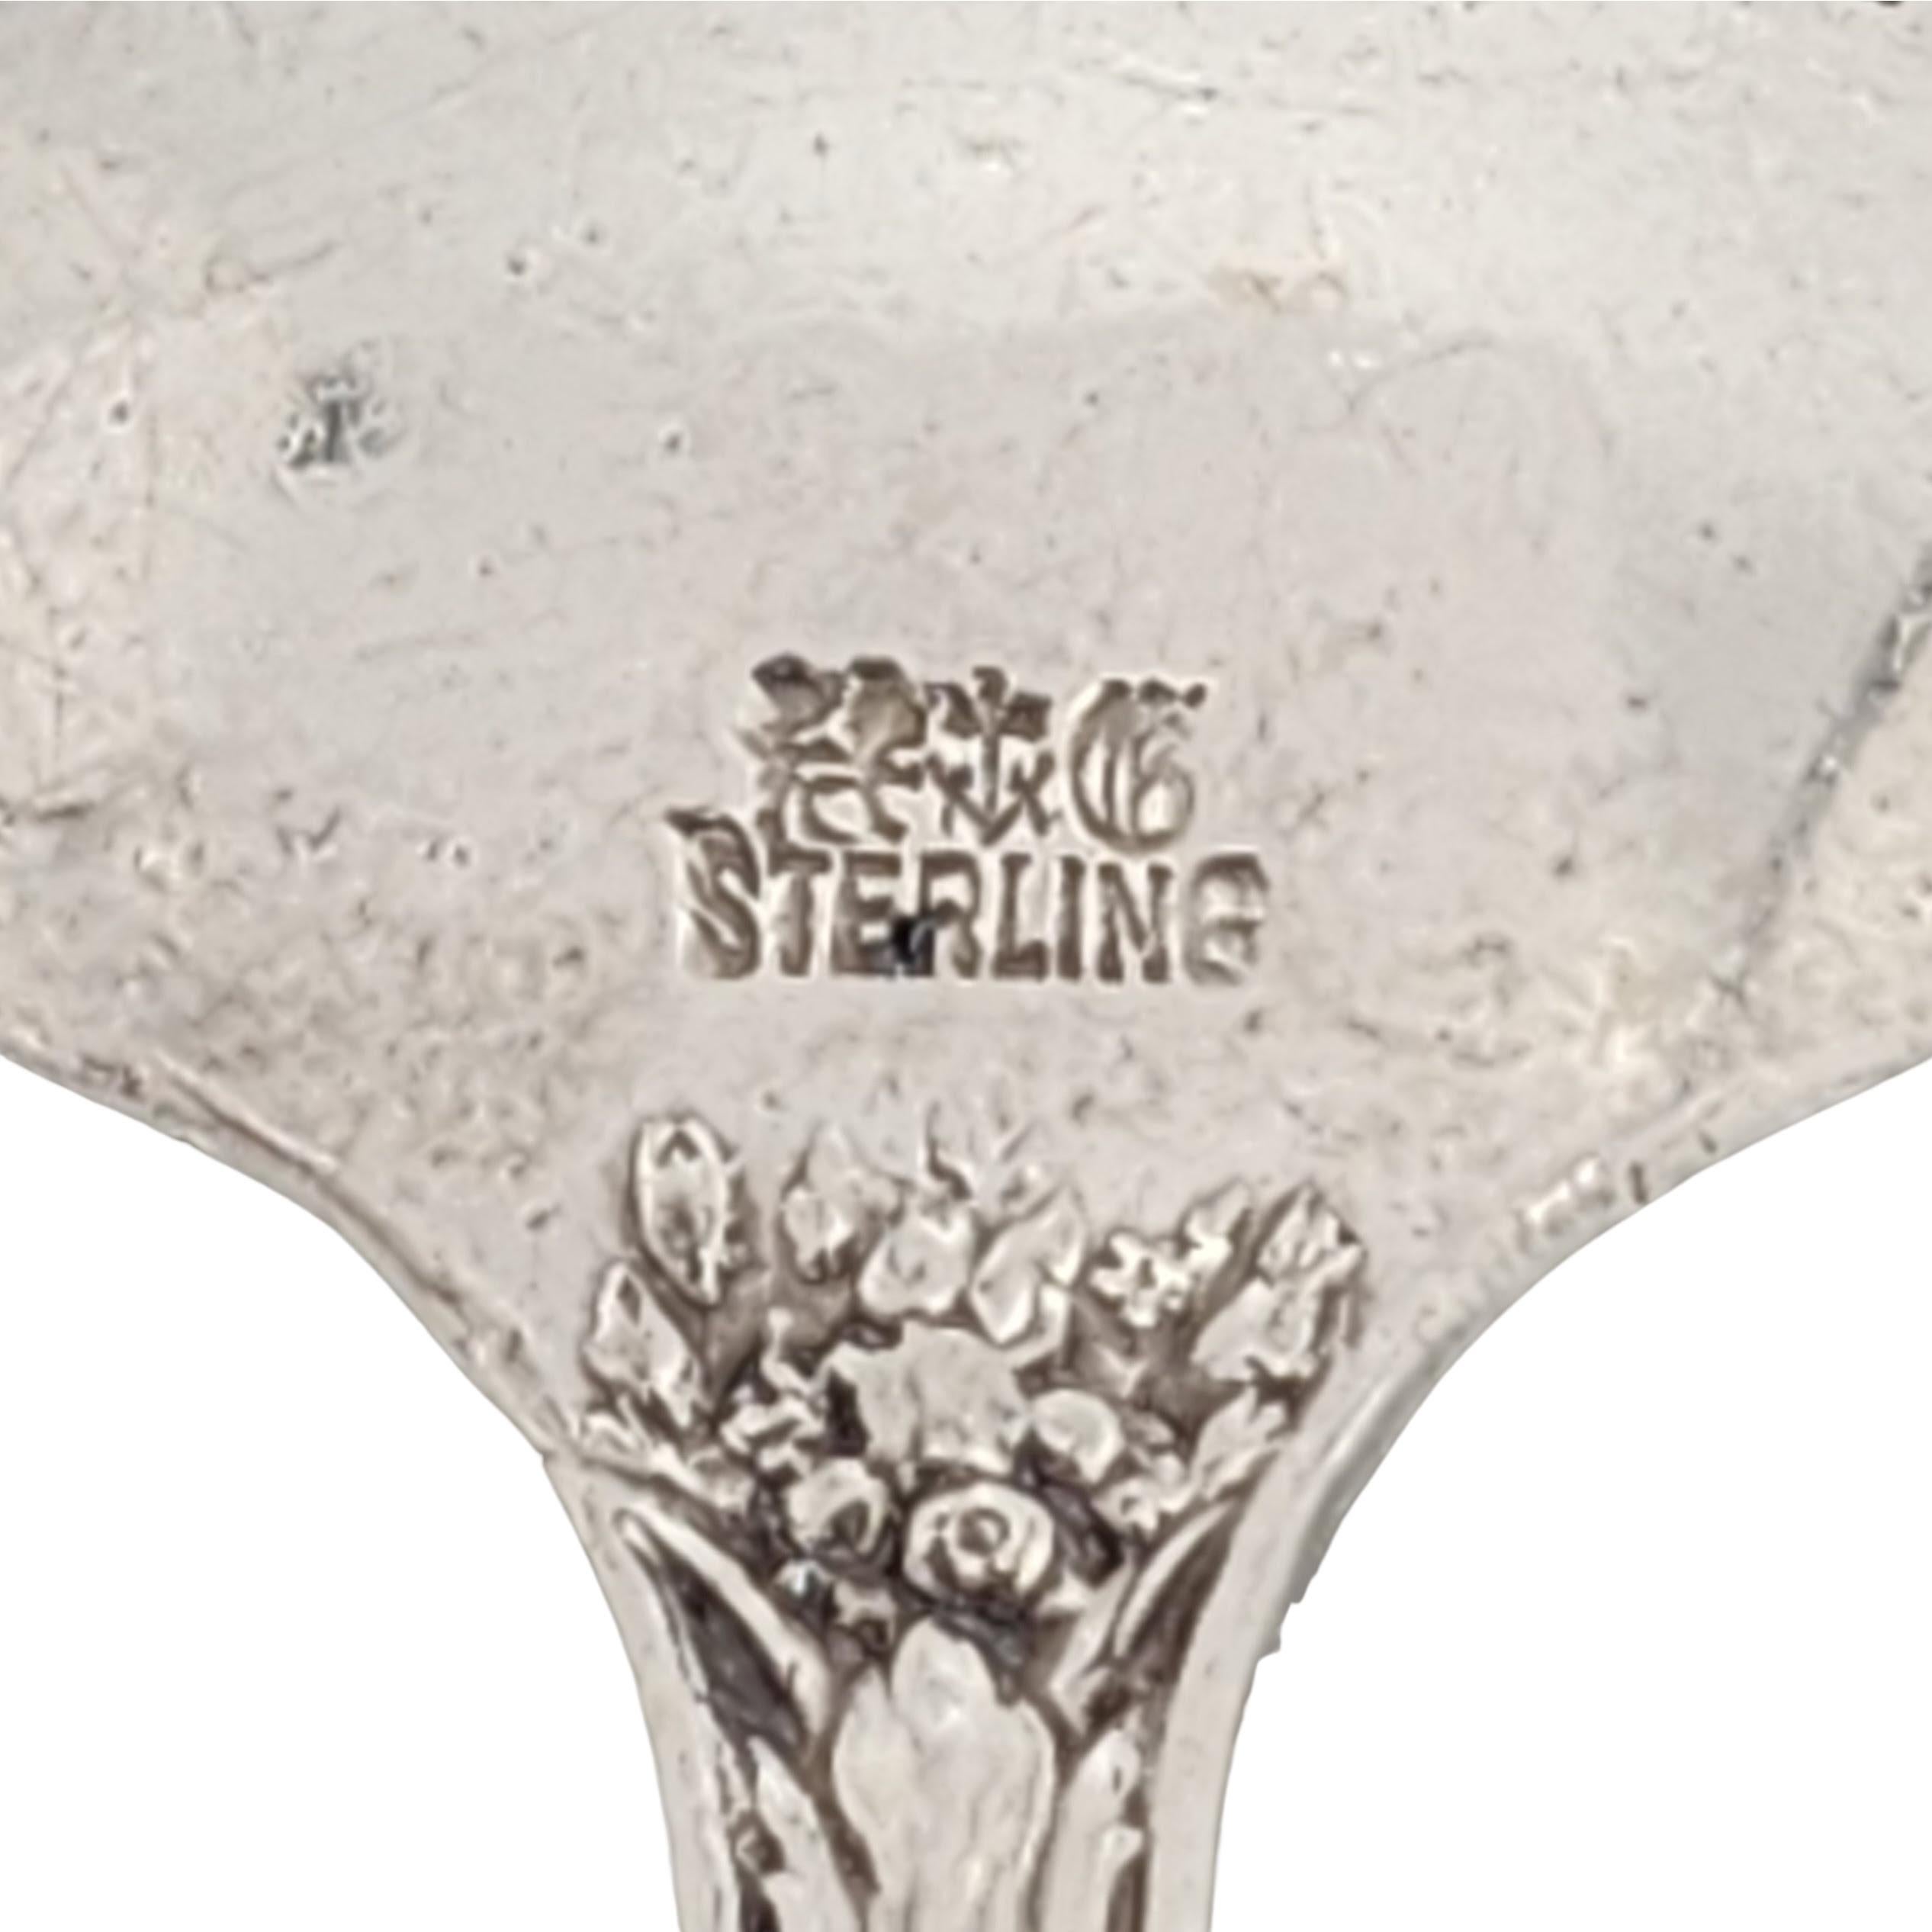 Set of 4 sterling silver round bowl soup bouillon spoons by Gorham in the Versailles pattern with a monogram.

Monogram appears to be AML, on the back of the handle.

Gorham's Versailles is a multi motif pattern designed by Antoine Heller in 1885.